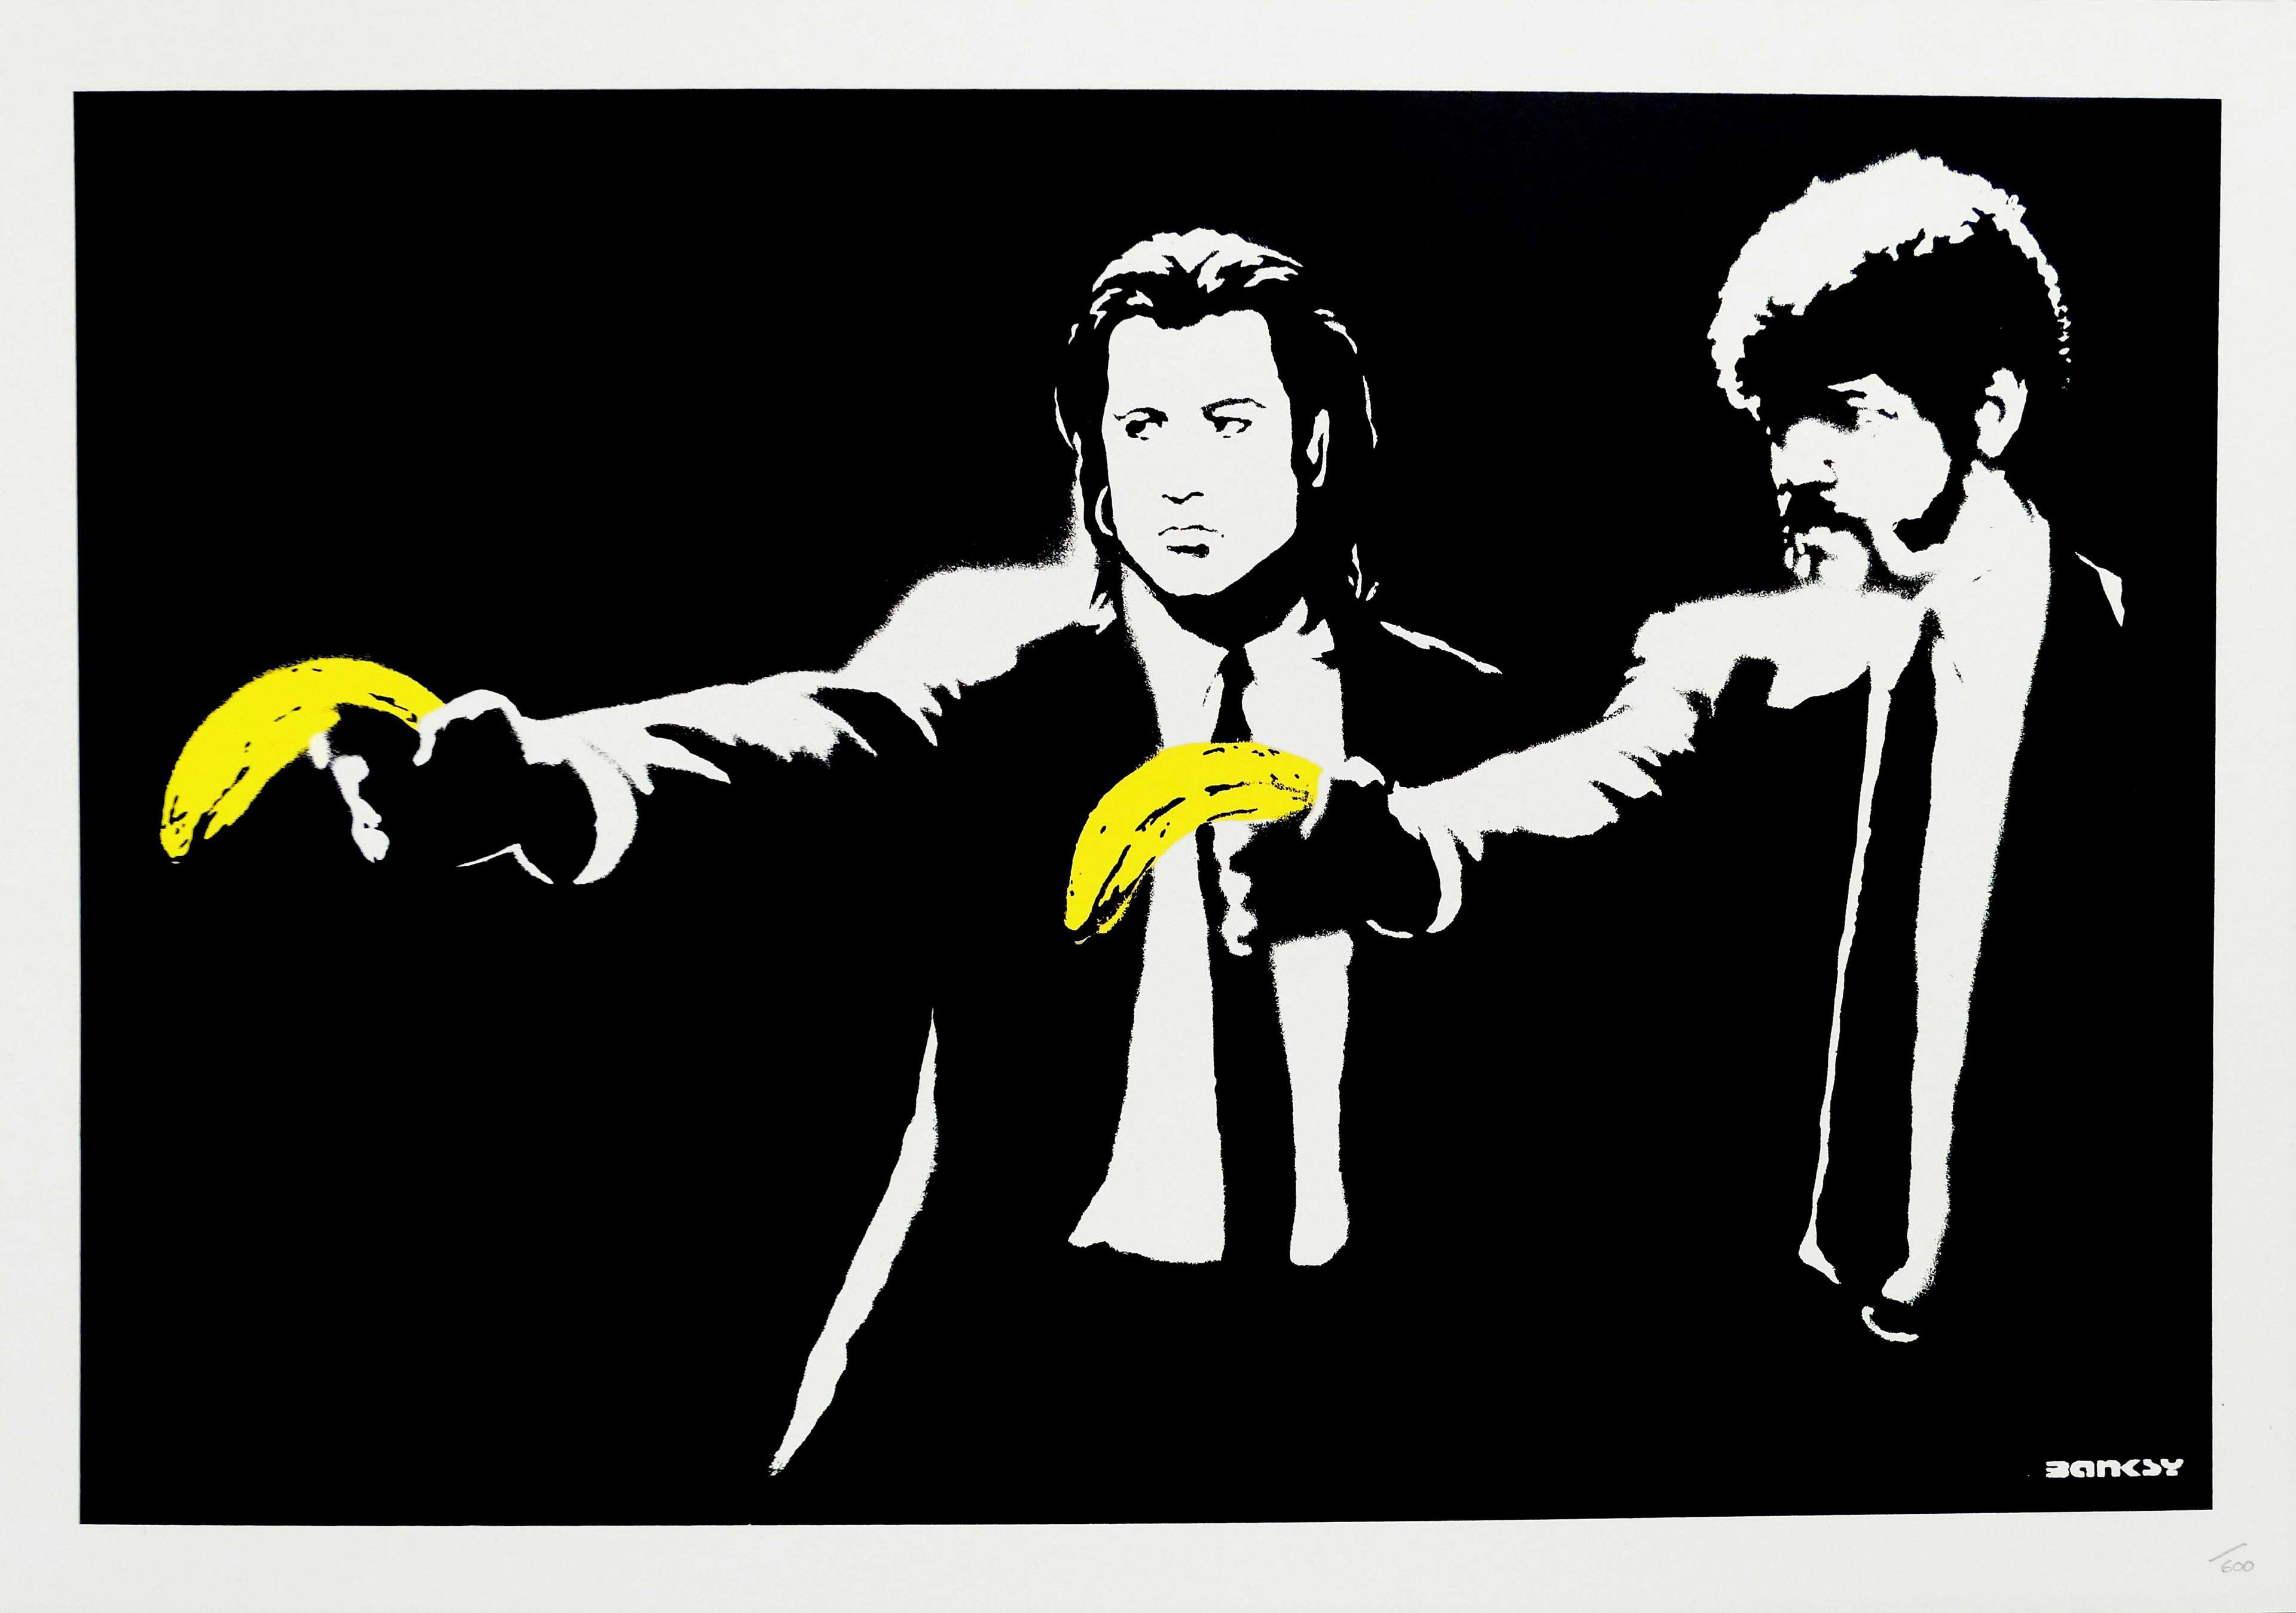 Pulp Fiction by Banksy